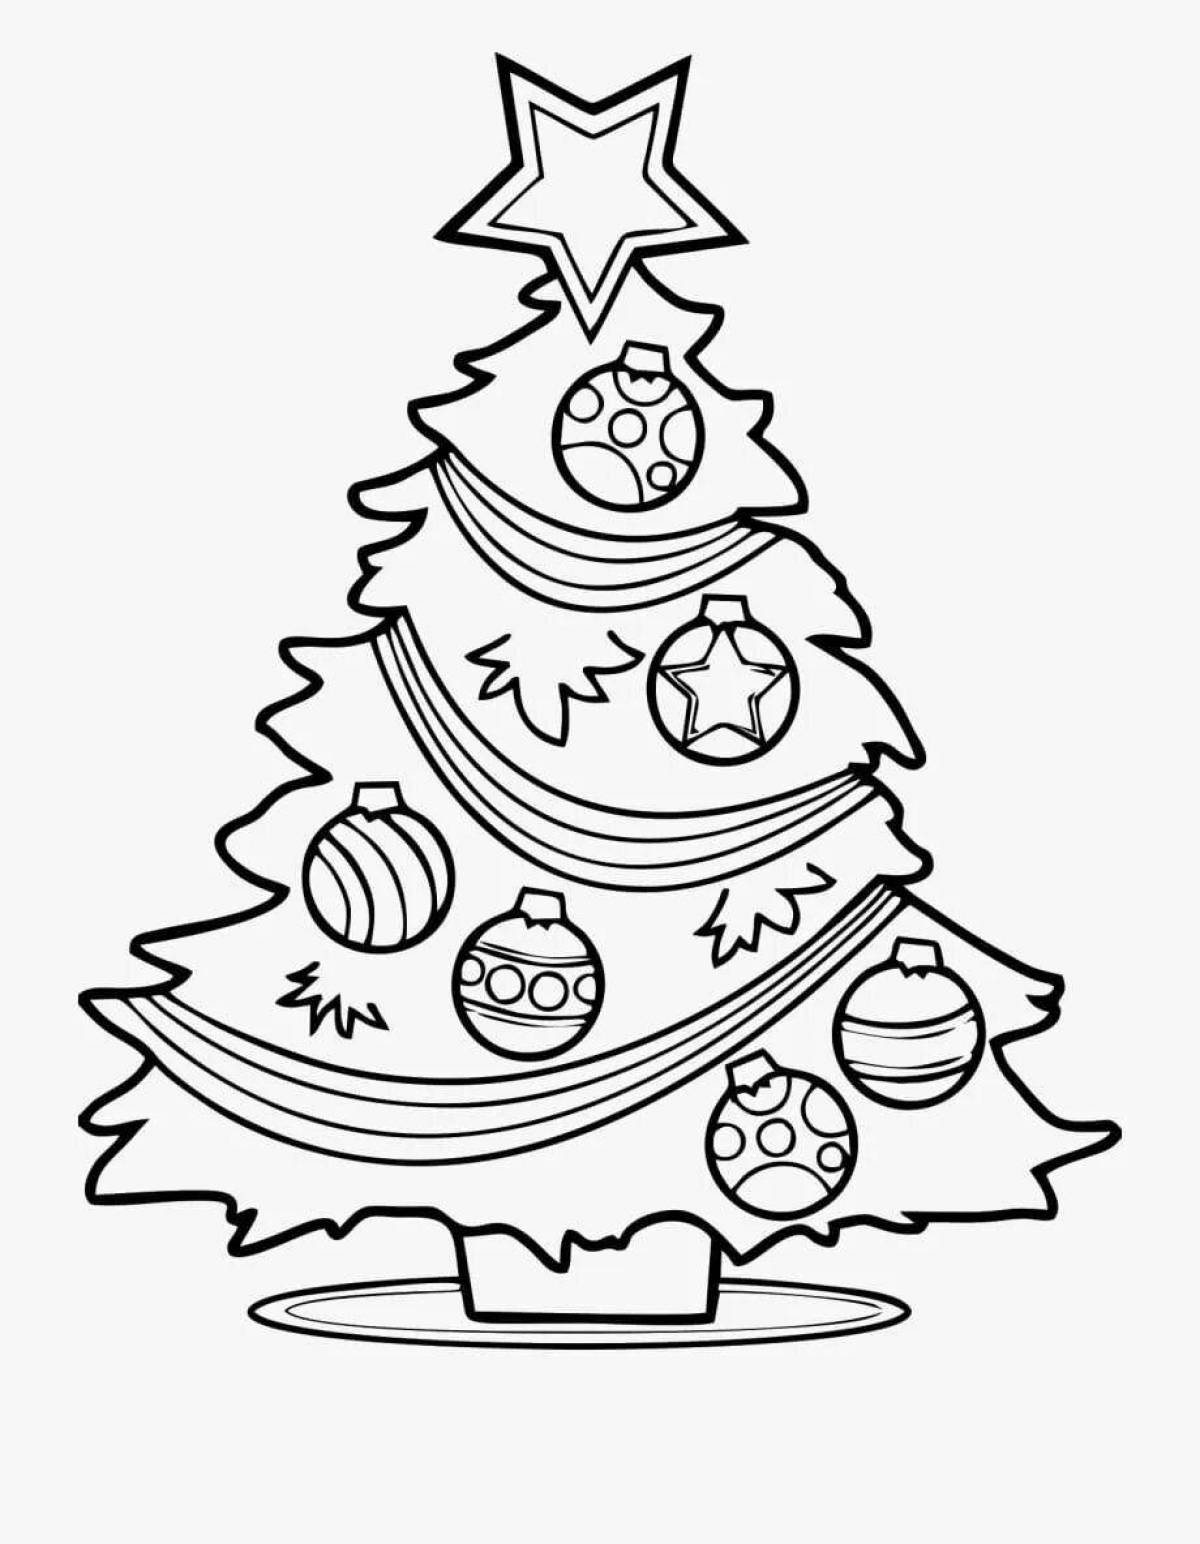 Royal christmas tree coloring picture for kids